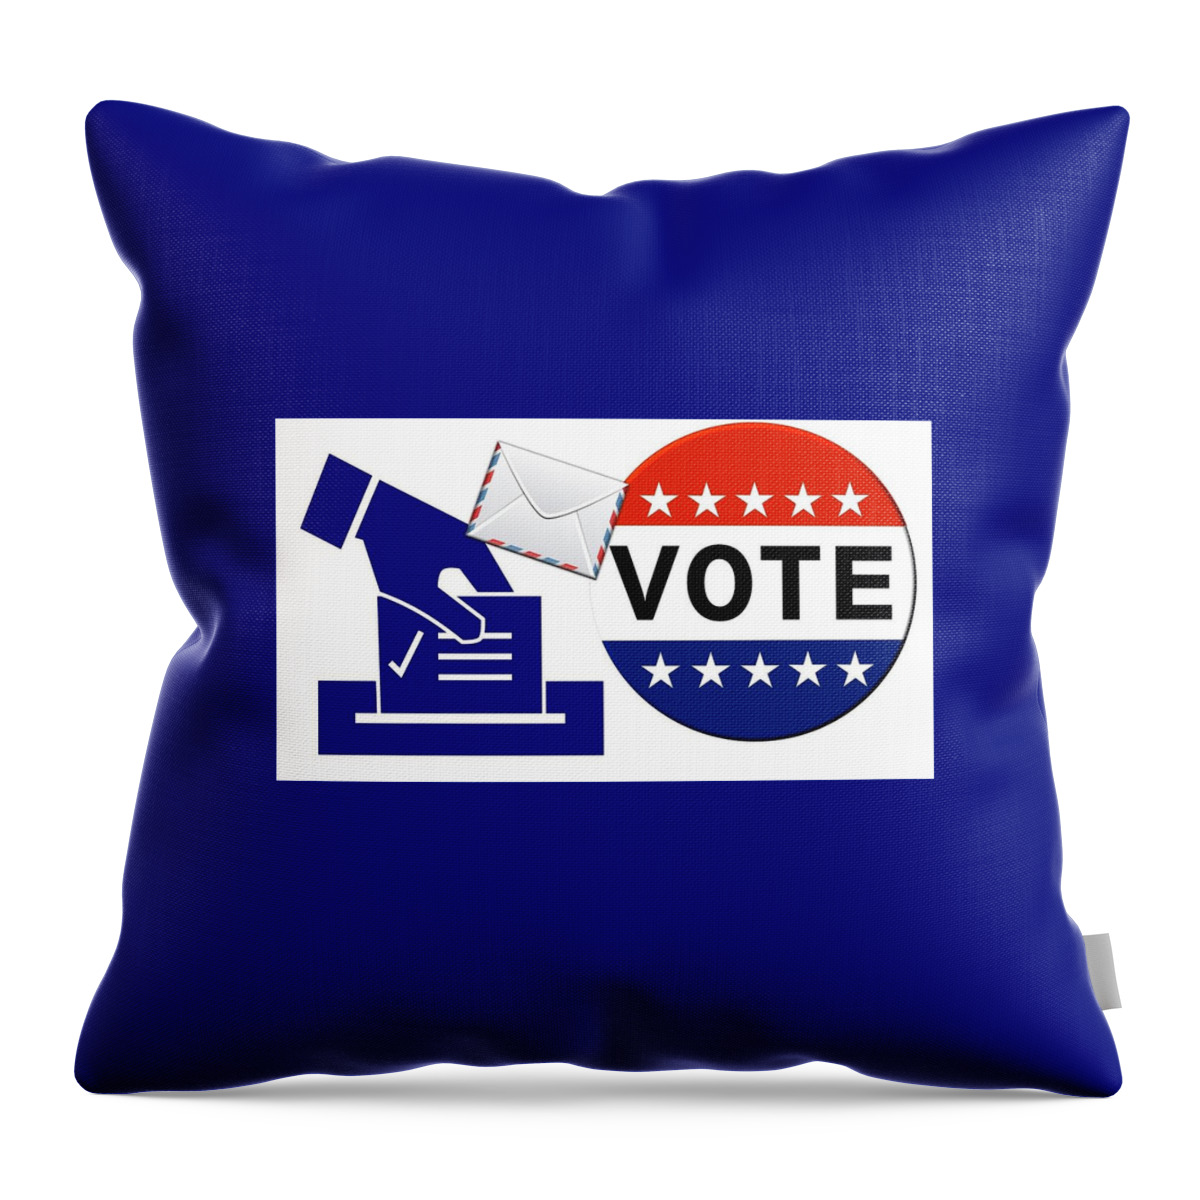 Vote Throw Pillow featuring the drawing Vote by Nancy Ayanna Wyatt